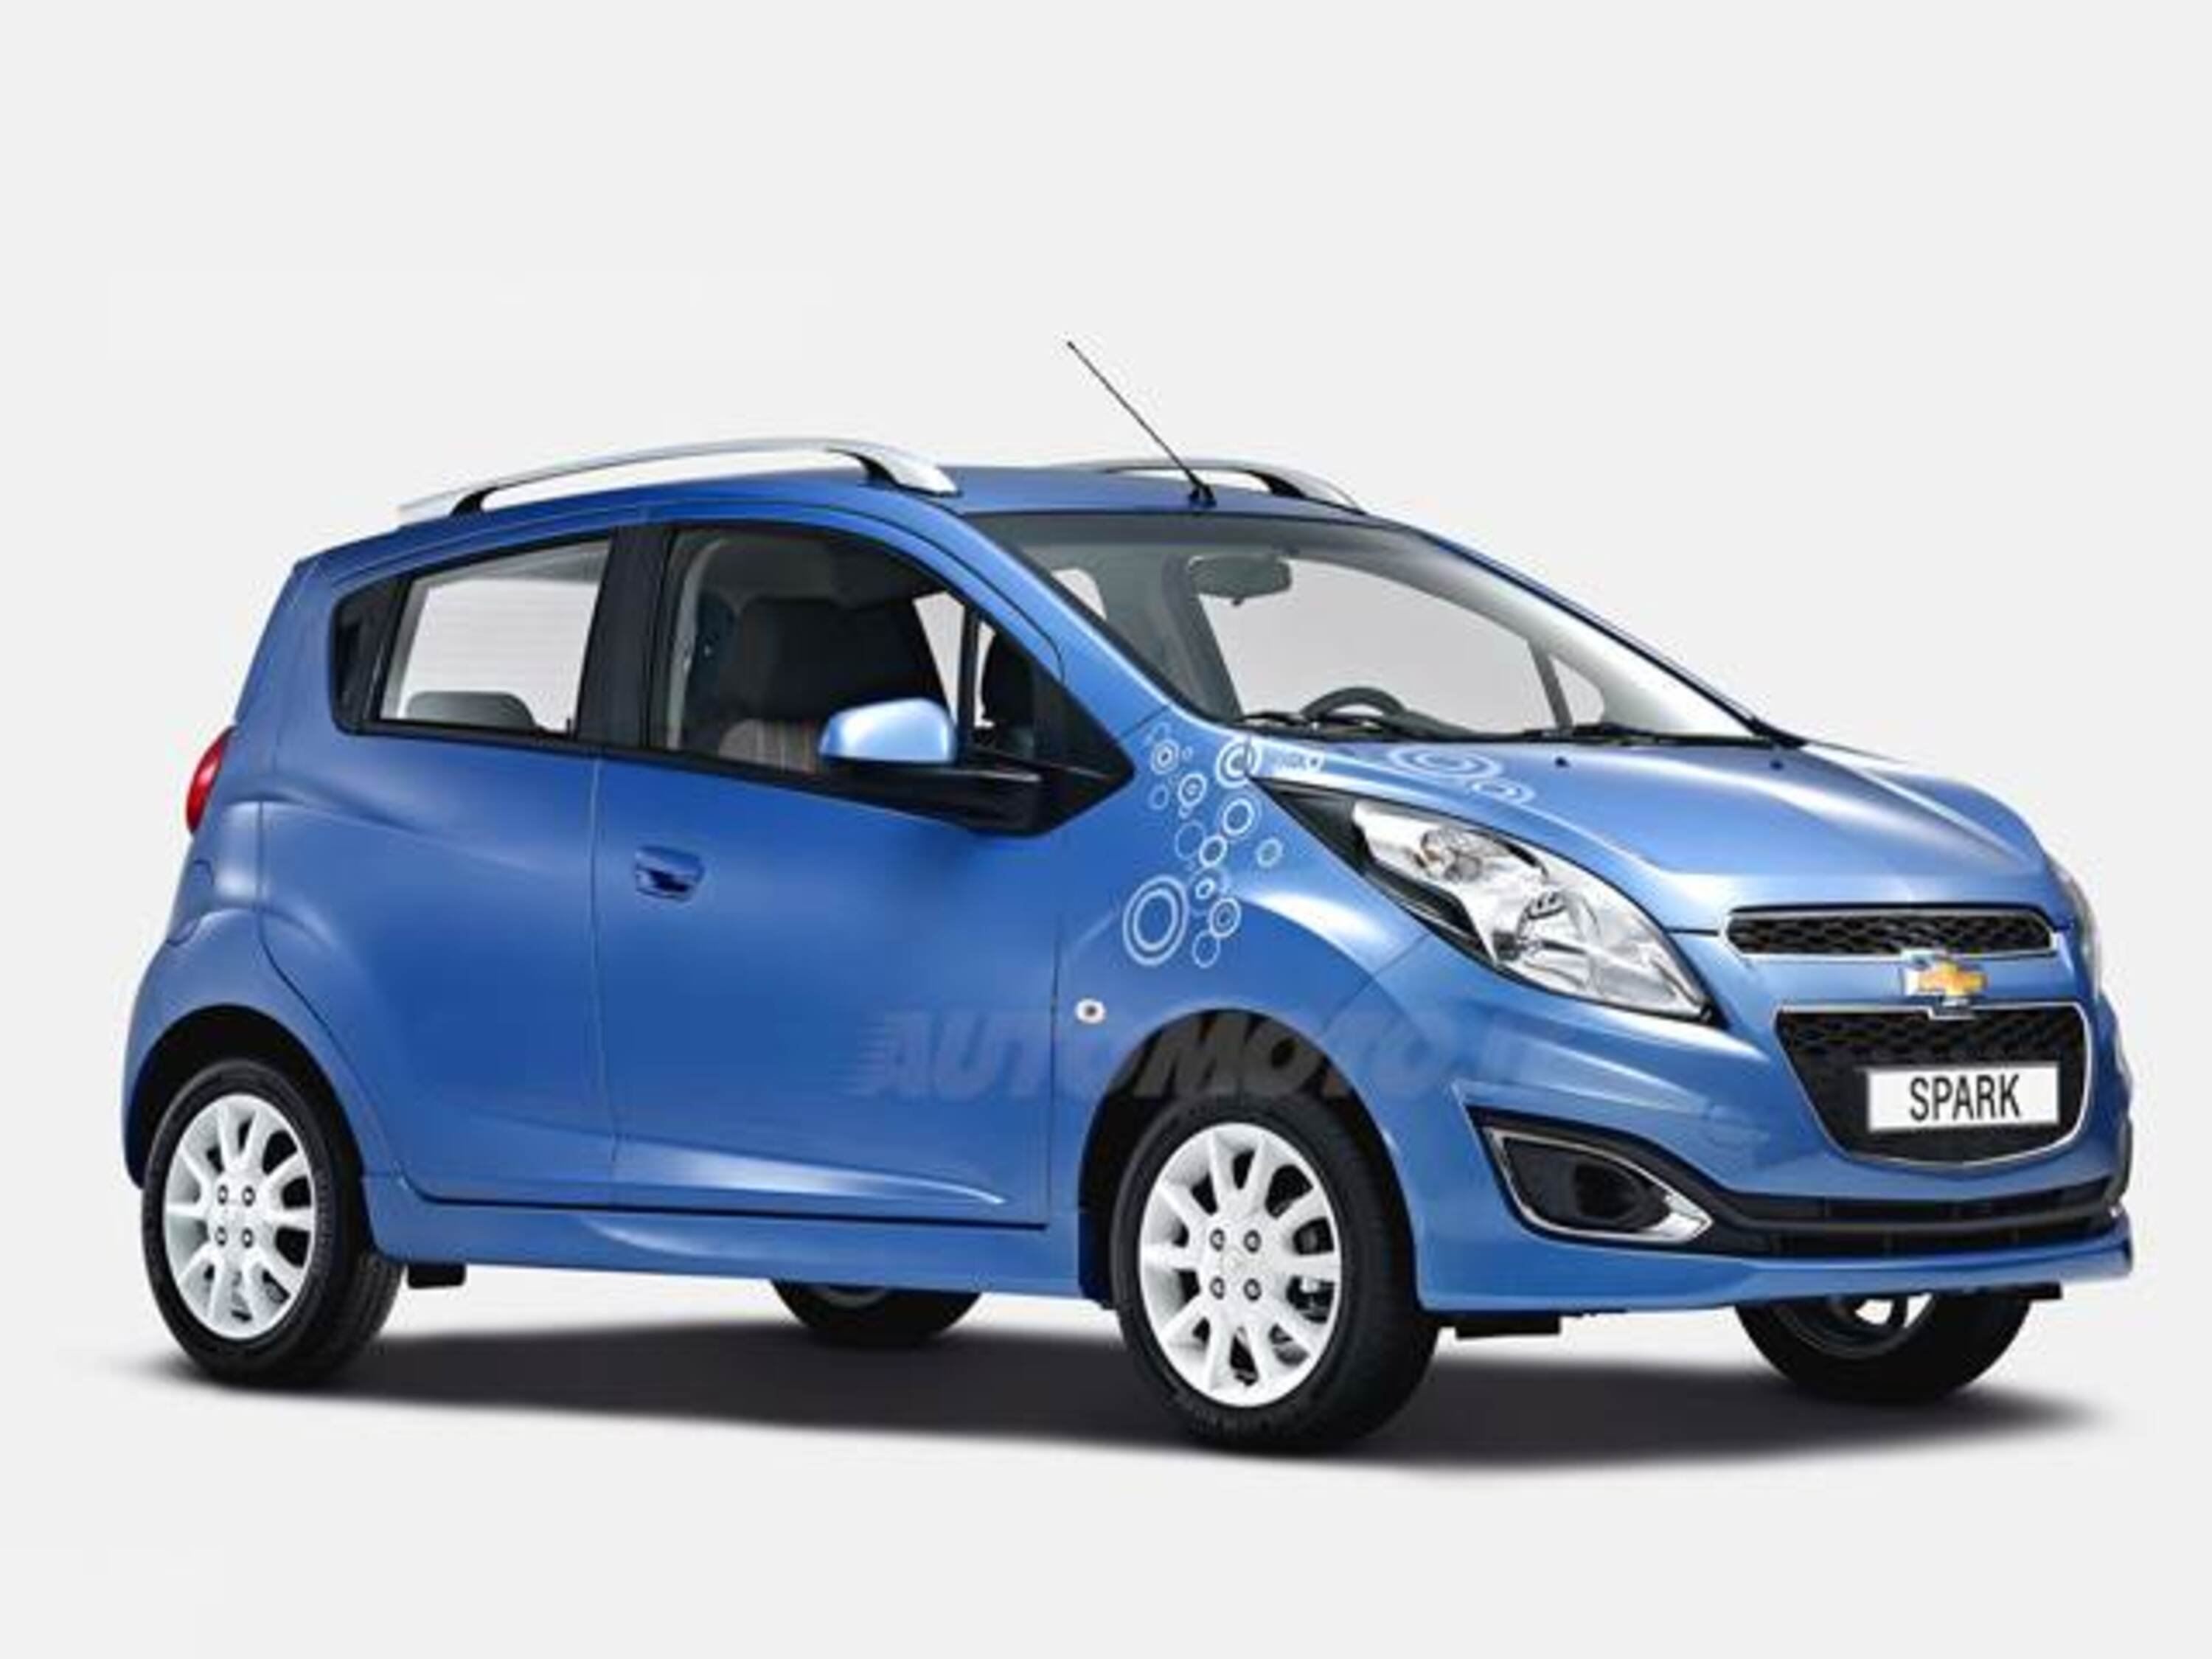 Chevrolet Spark 1.0 Special Edition "Bubble" MY'13